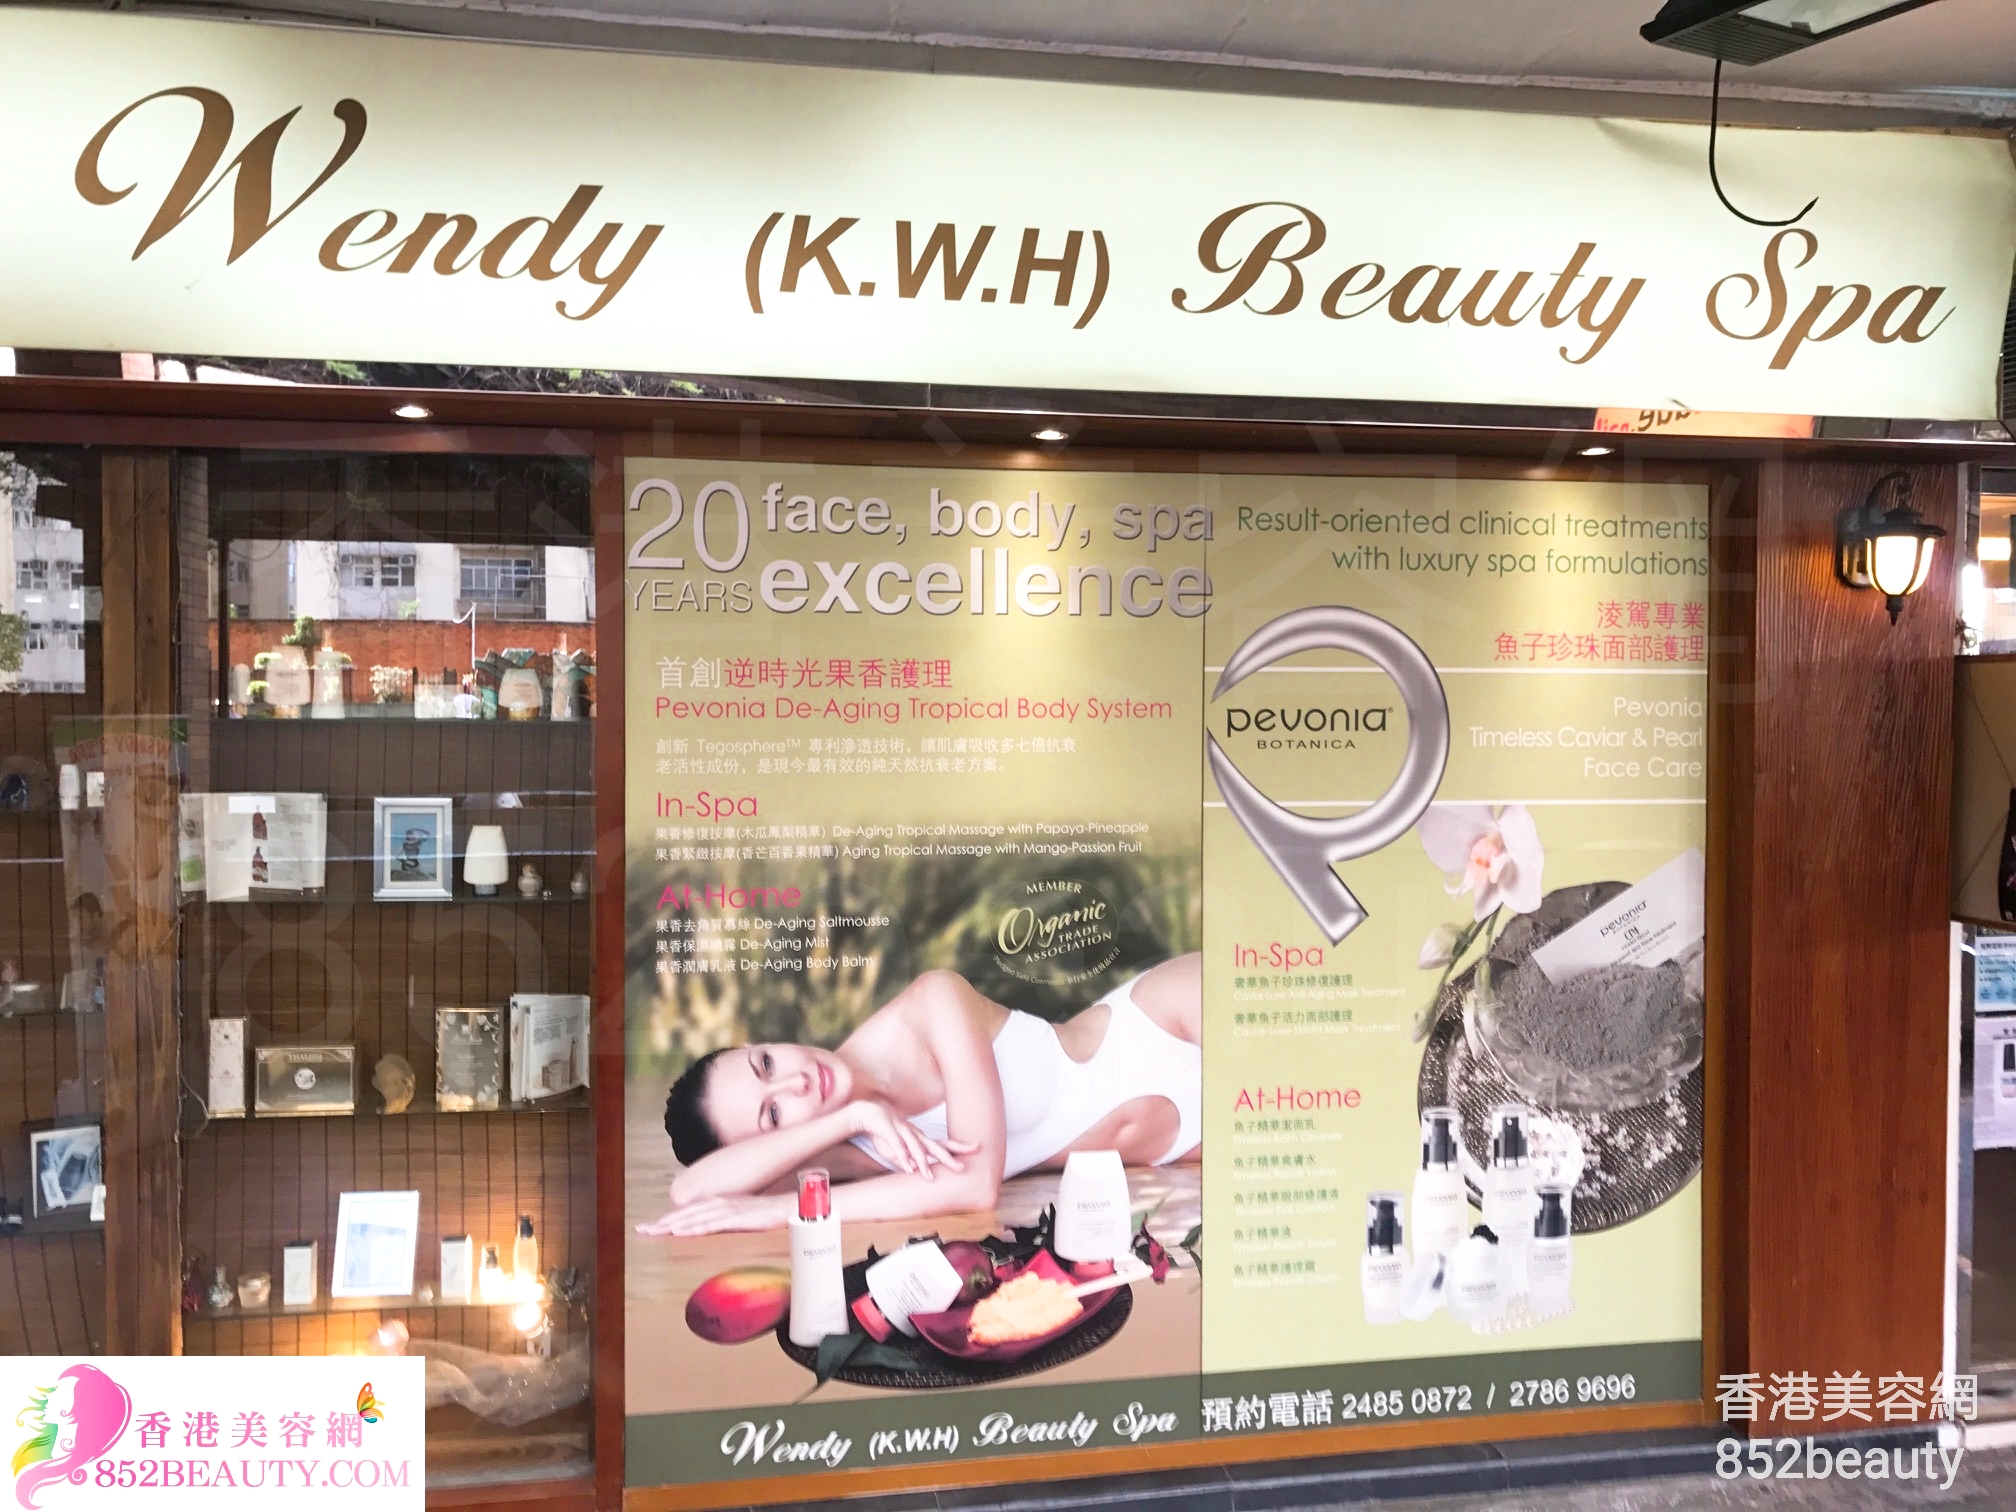 Hair Removal: Wendy (K.W.H) Beauty Spa